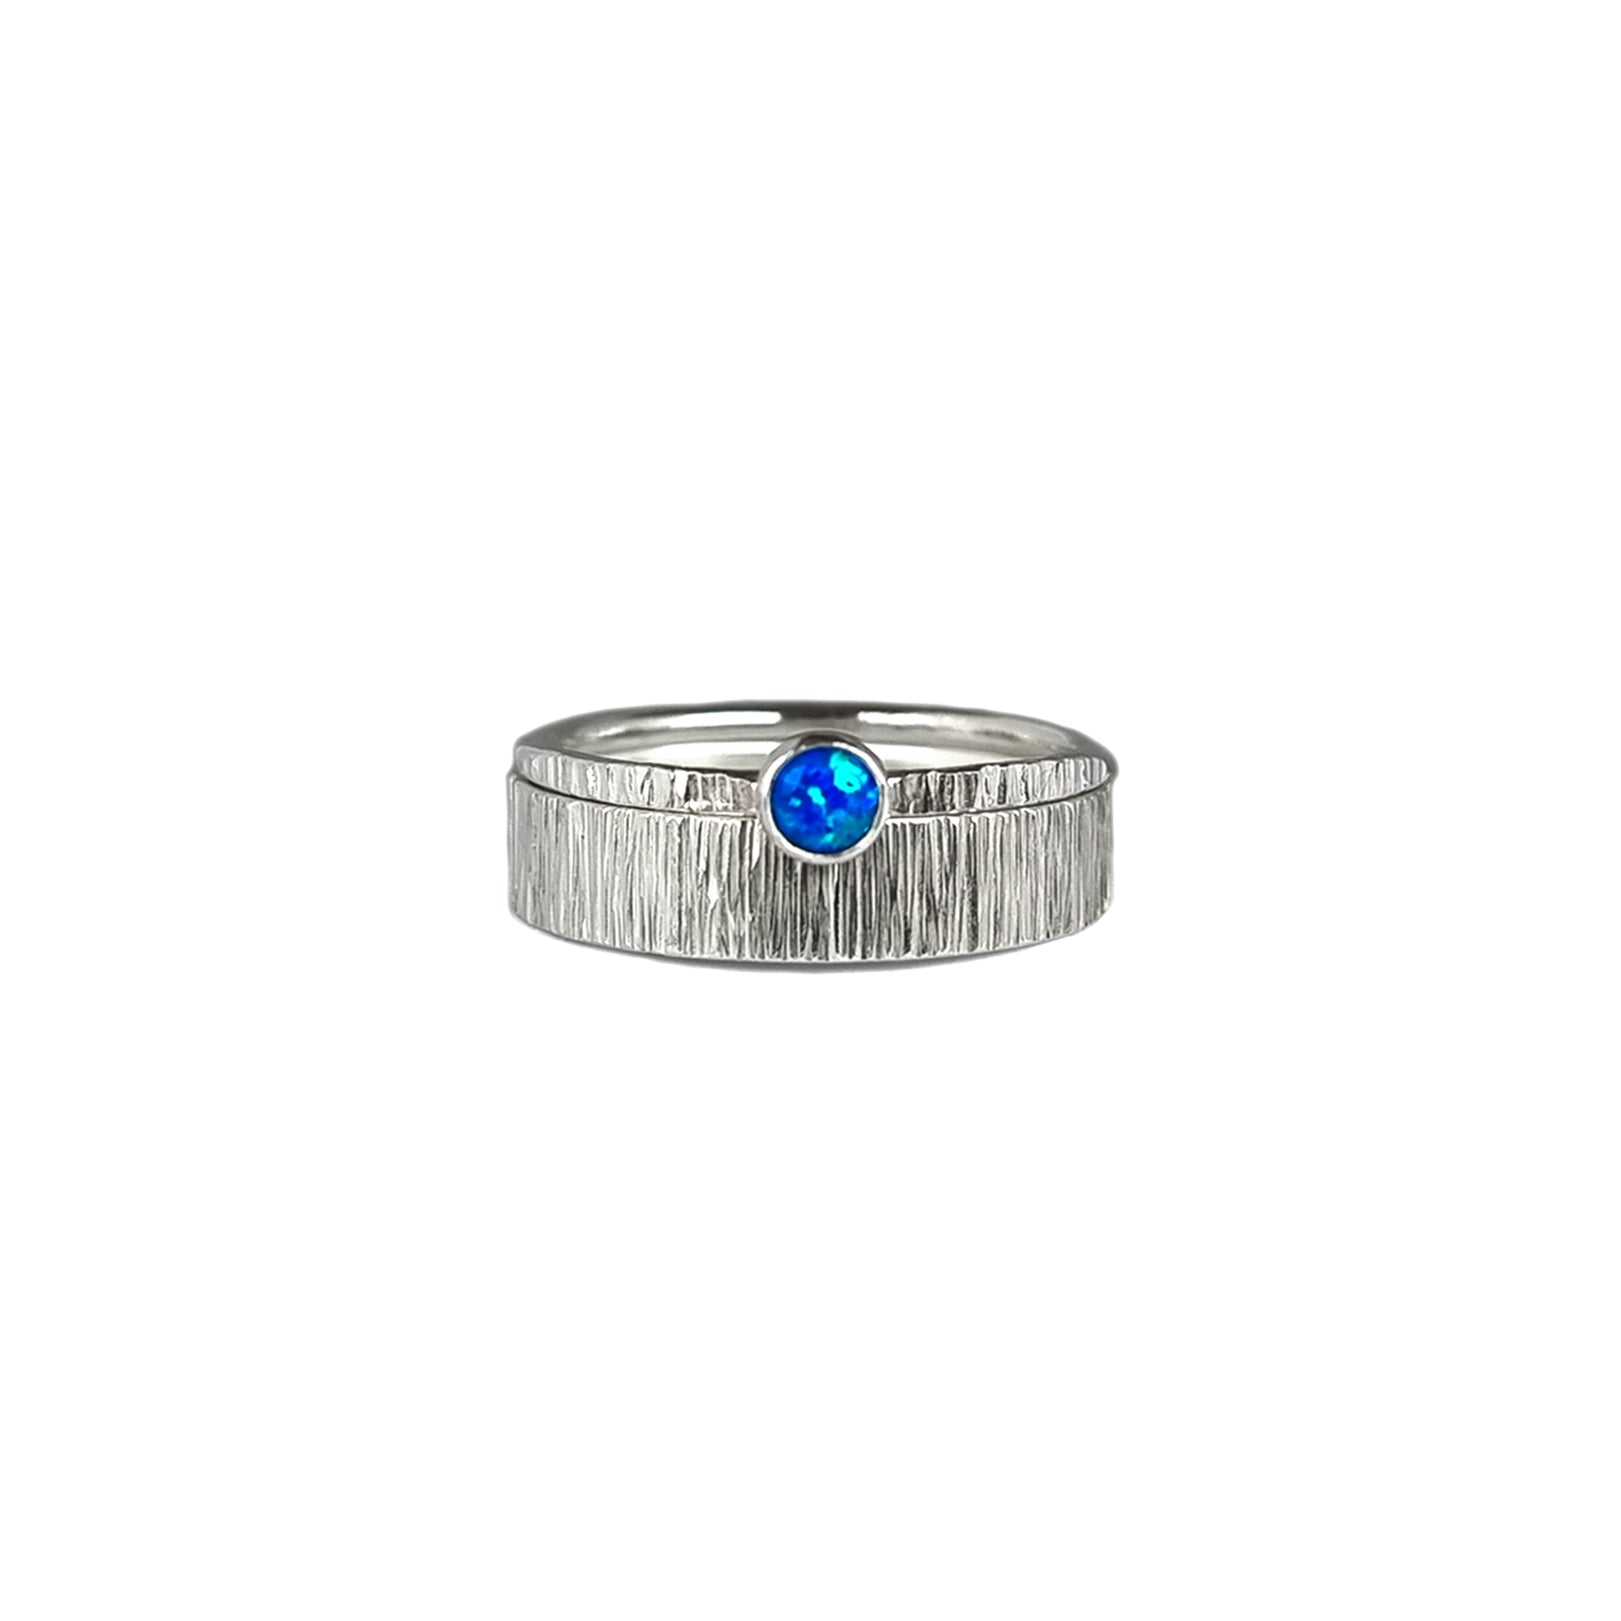 Emily Eliza Arlotte Jewellery - Gender Neutral Unisex Genderless Textured Sterling Silver Ring Mens jewelry Handmade Wedder Wedding Band Marriage Simple Contemporary Handmade Handcrafted Made in Tasmania Australia Ethical Eco Environmentally Friendly Opal Stack